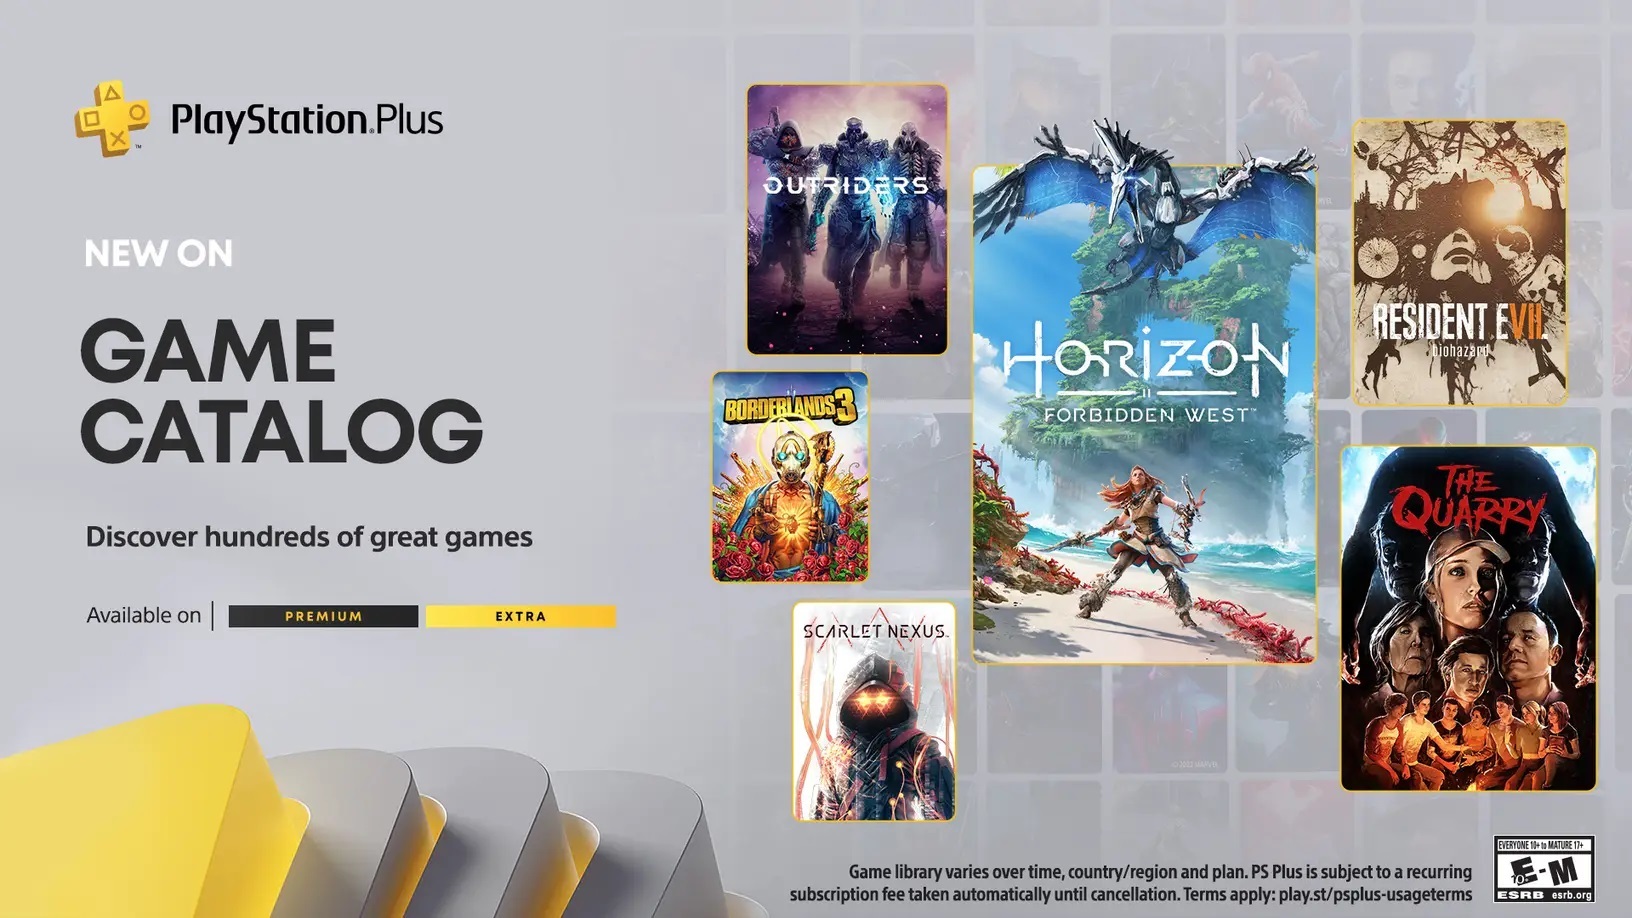 Official: Horizon Forbidden West, Resident Evil 7 and Borderlands 3 on PlayStation Plus